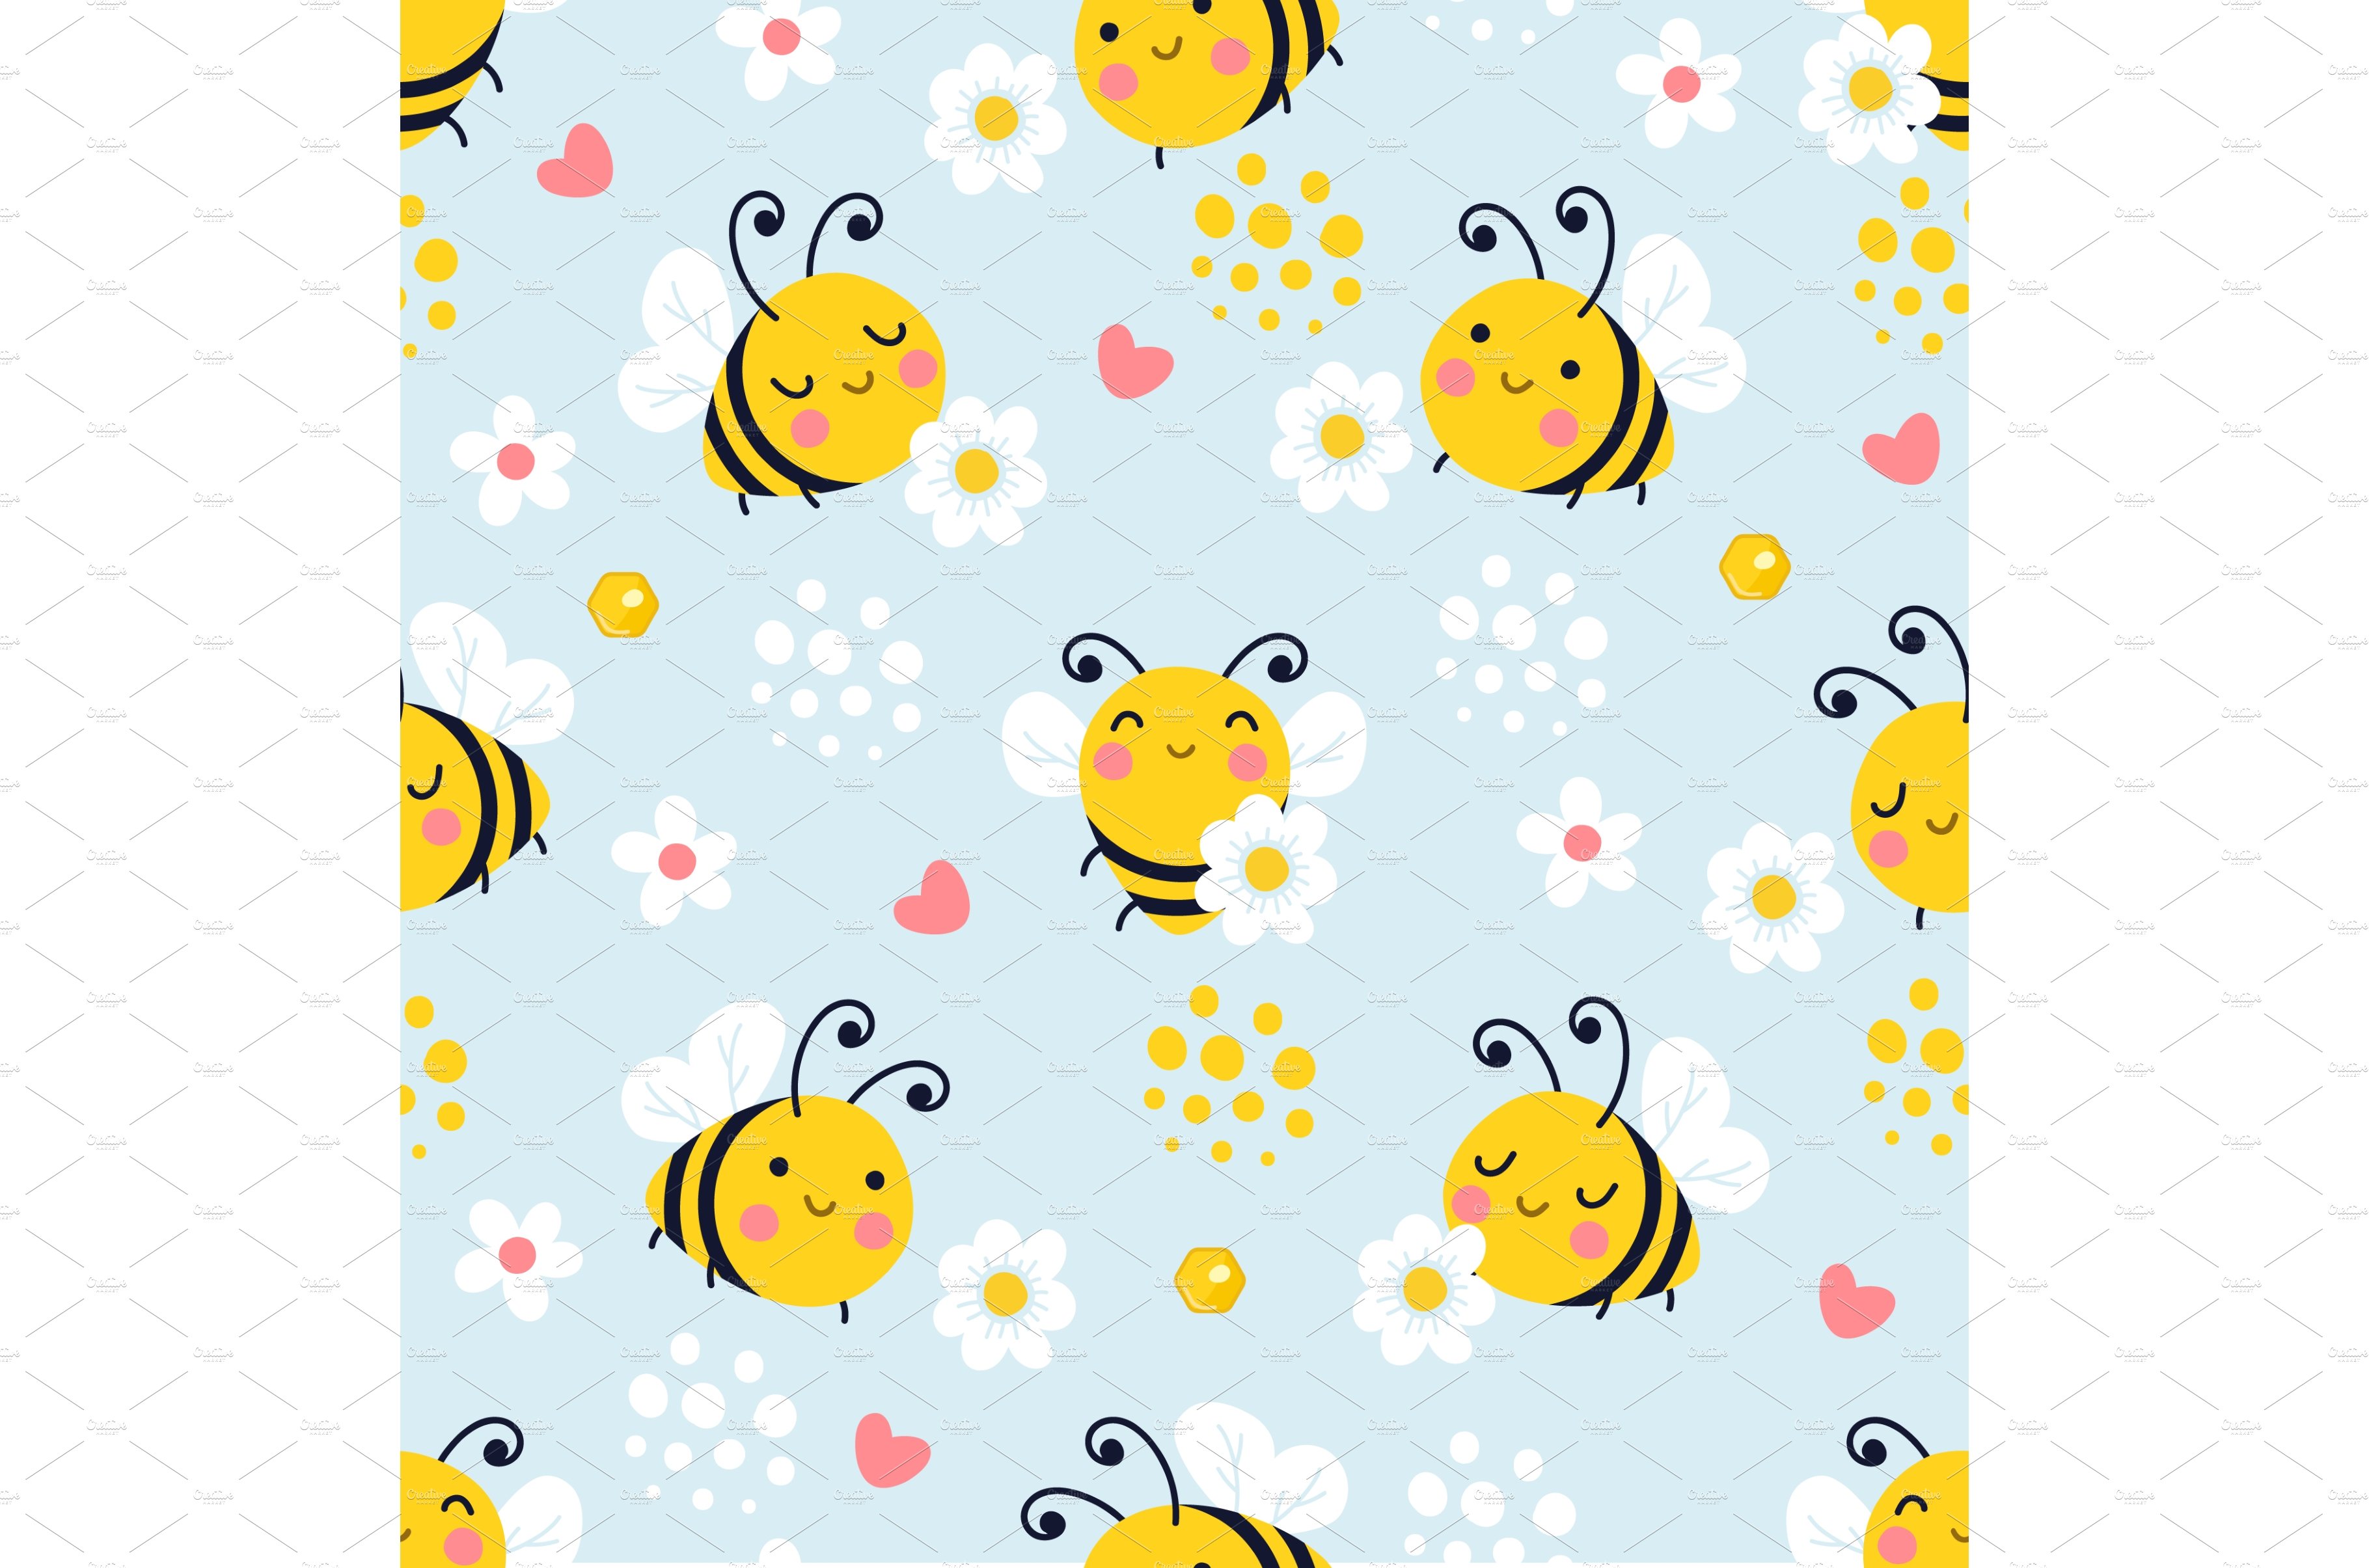 Bee seamless pattern. Bees flying cover image.